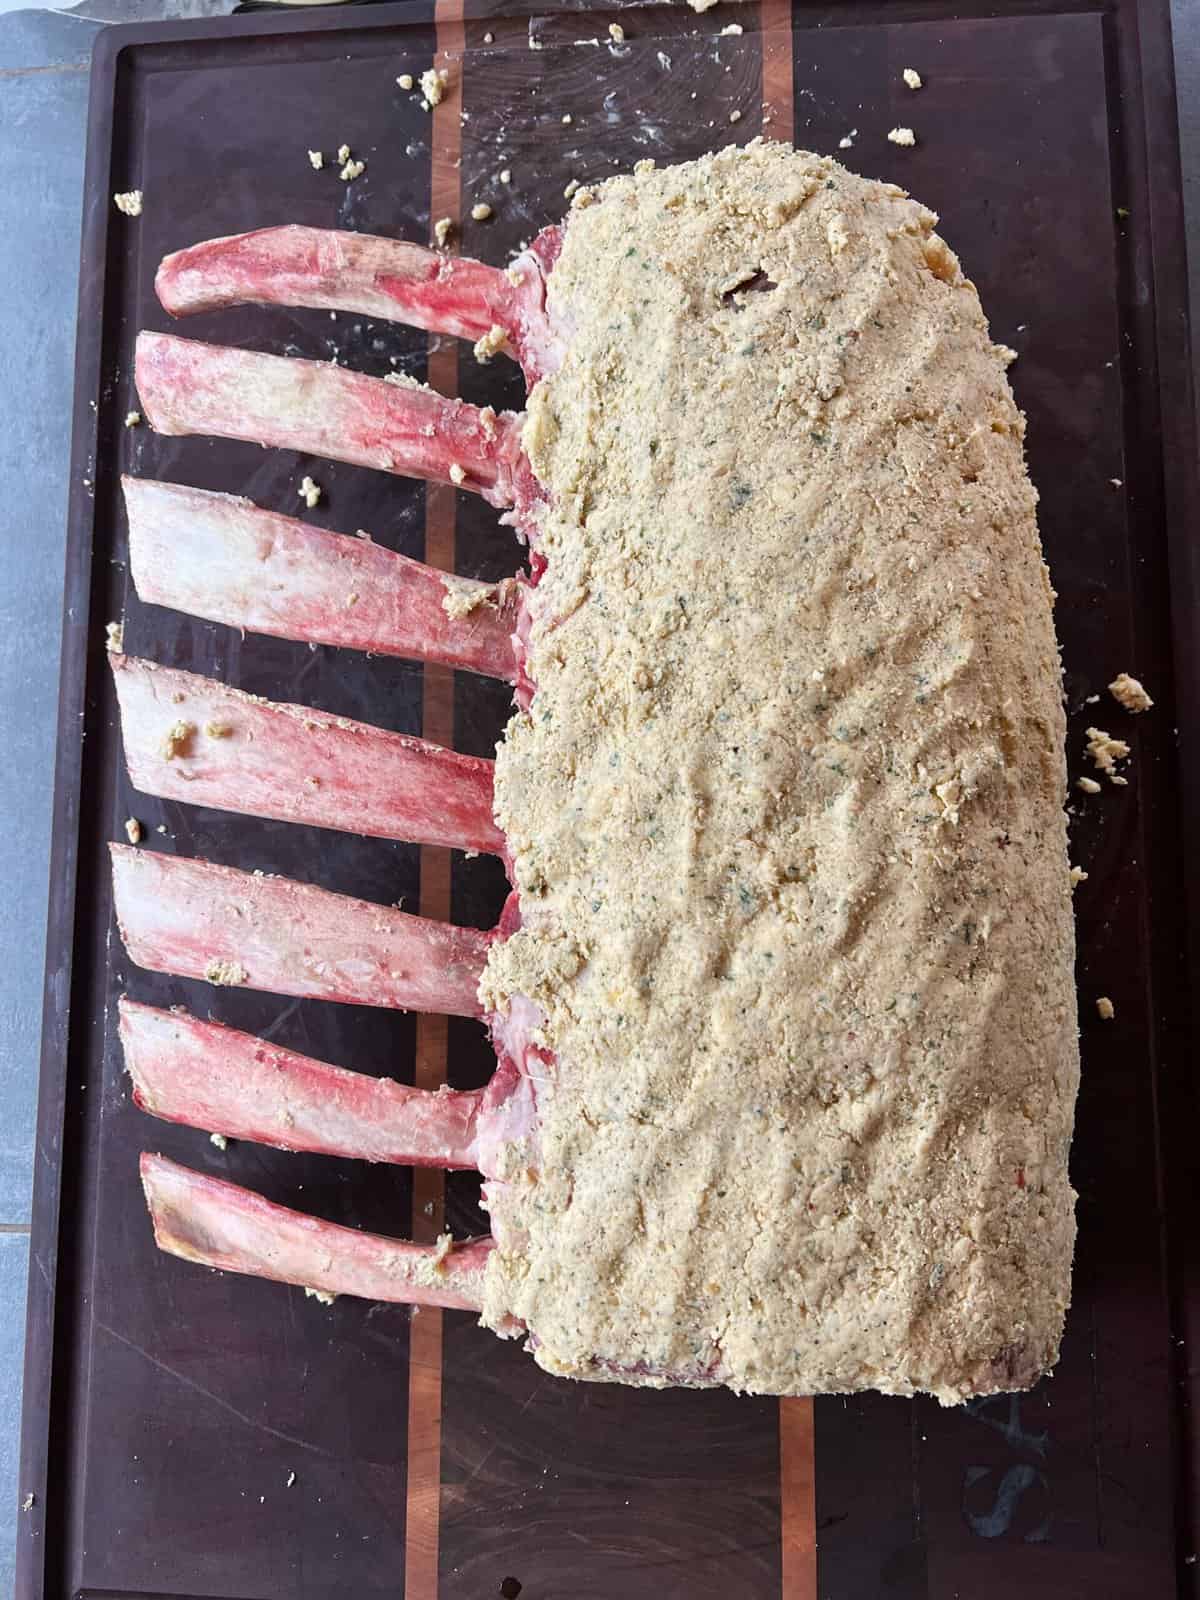 The raw roast on a cutting board covered in the compound butter.